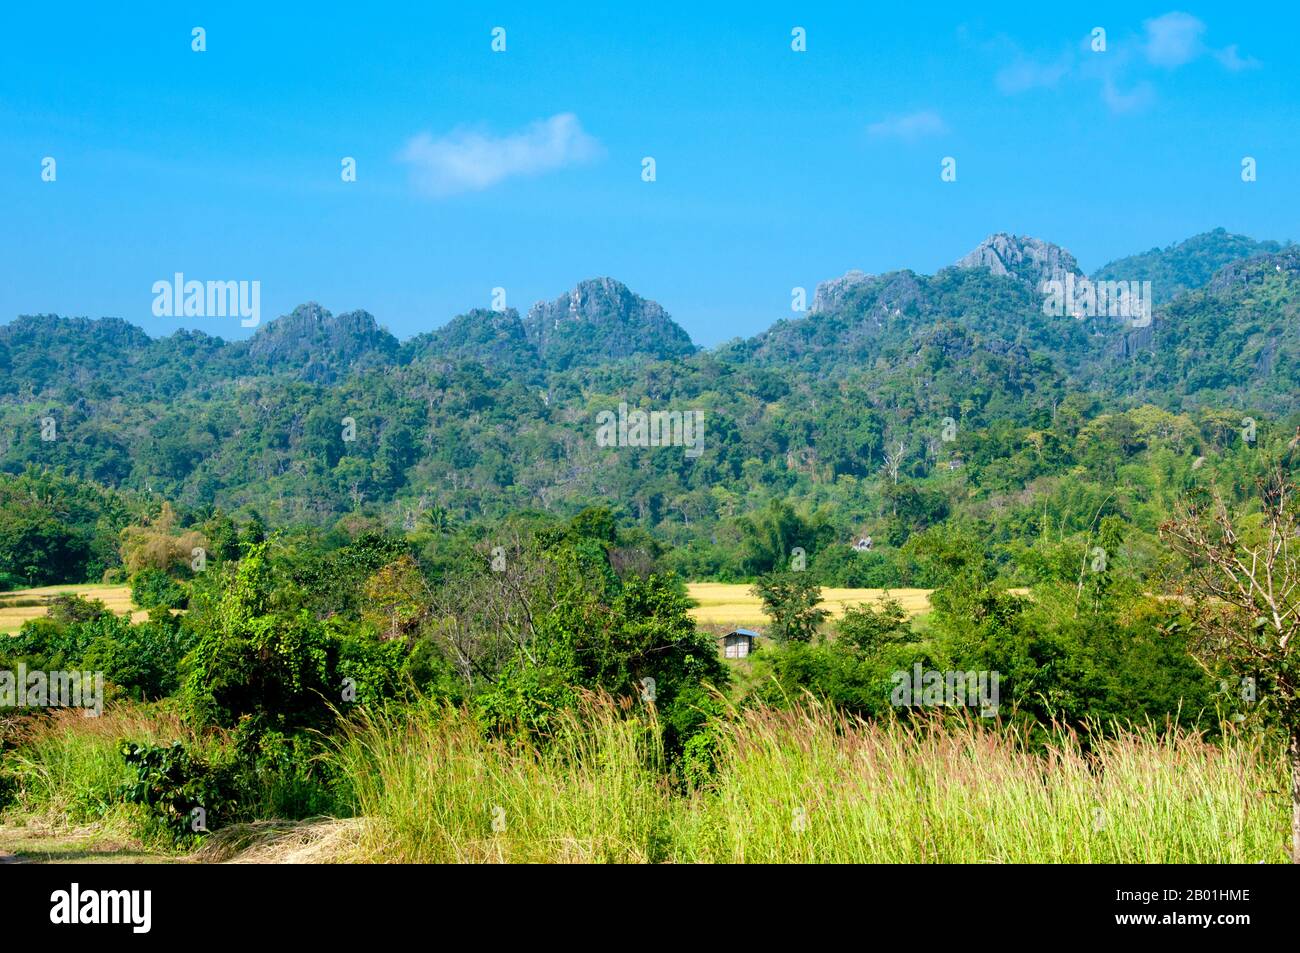 Thailand: View towards the Phu Luang National Park mountain range, Loei Province.  Loei Province is located in Thailand's upper North-East. Neighboring provinces are (from east clockwise) Nong Khai, Udon Thani, Nongbua Lamphu, Khon Kaen, Phetchabun, Phitsanulok. In the north it borders Xaignabouli and Vientiane Provinces of Laos.  The province is covered with low mountains, while the capital Loei is located in a fertile basin. The Loei River, which flows through the province, is a tributary of the Mekong which, together with the smaller Hueang River, forms the northern boundary of the province Stock Photo